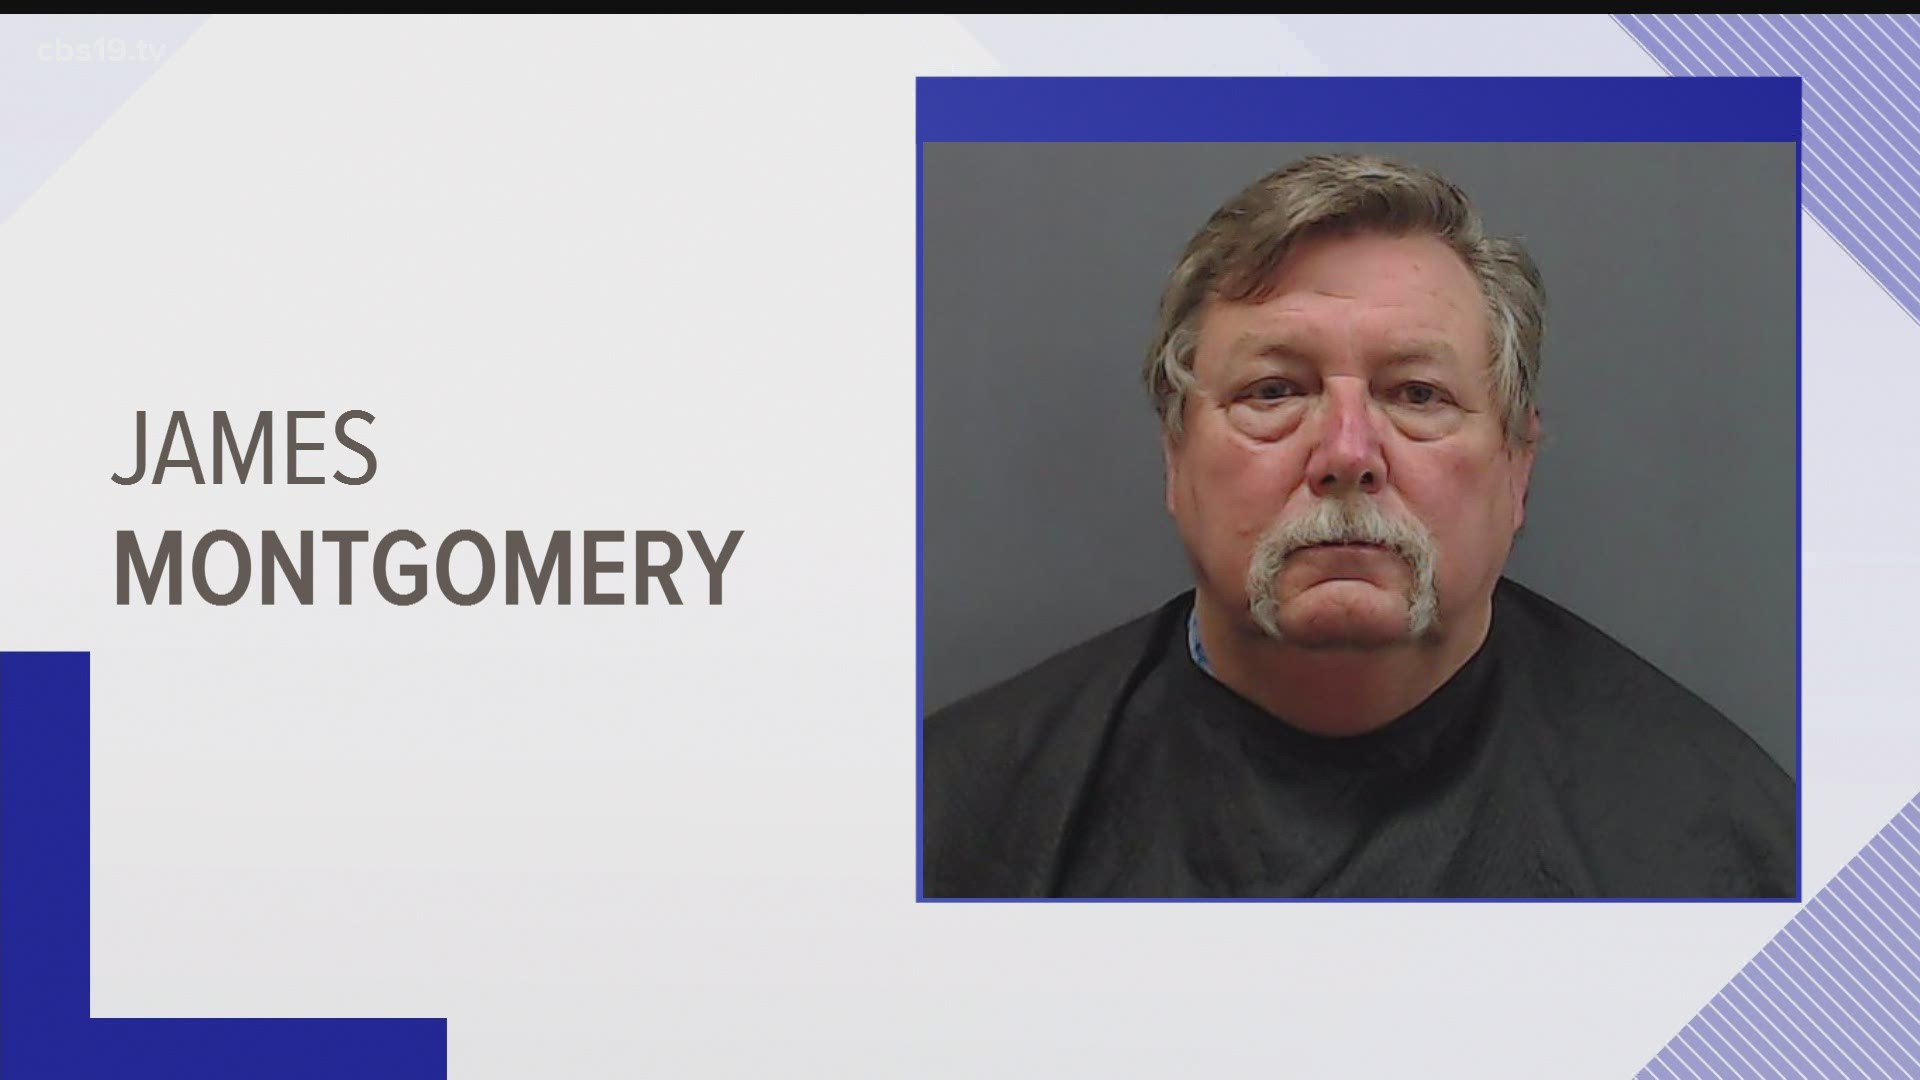 According to jail records, James Monte Montgomery was arrested June 3 for online solicitation of a minor.